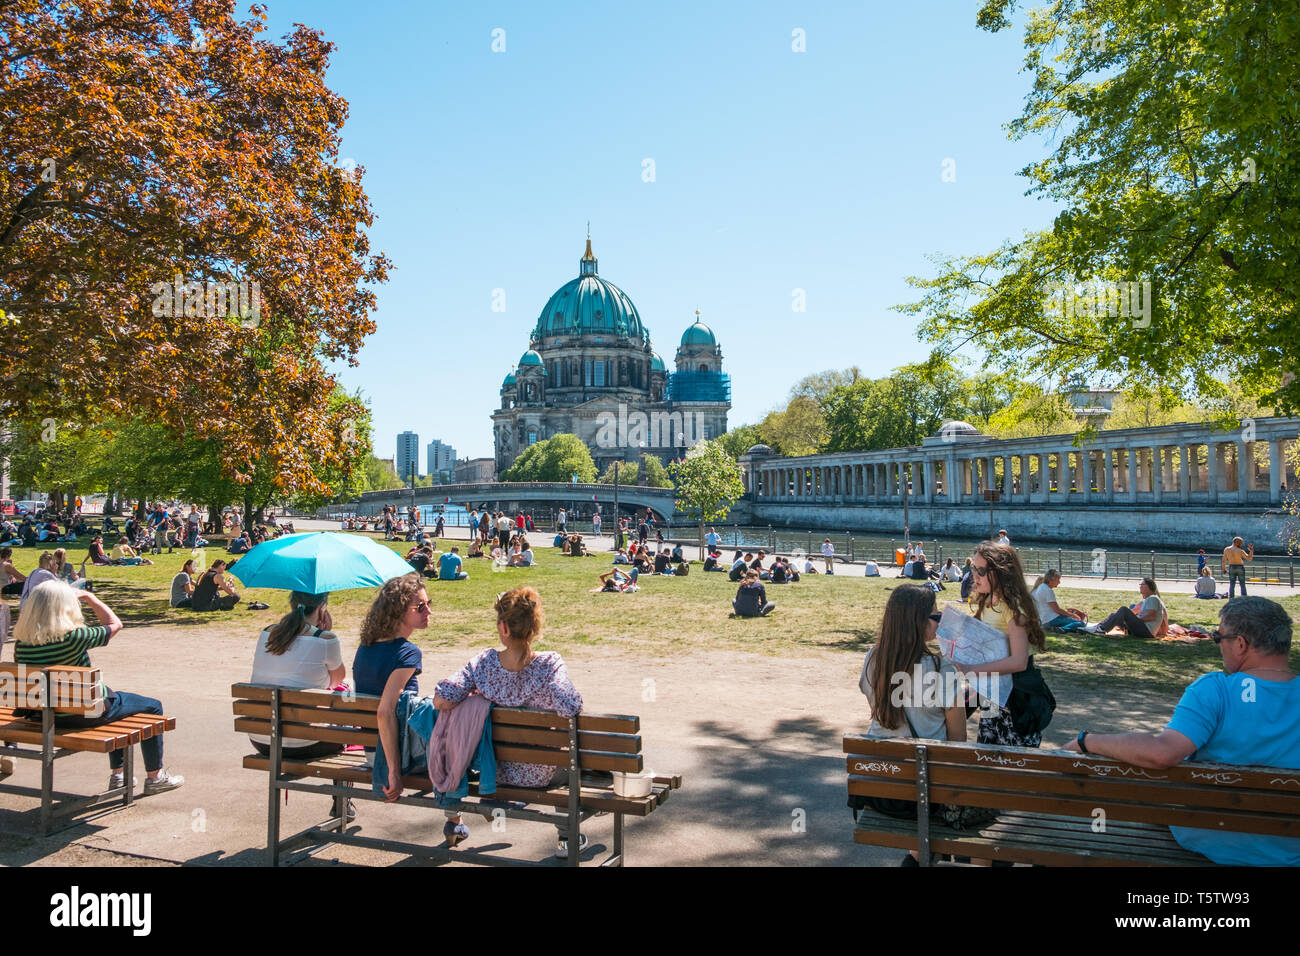 Berlin, Germany - April, 2019: People in public park on a sunny day near Museum Island and Berlin Cathedral Stock Photo